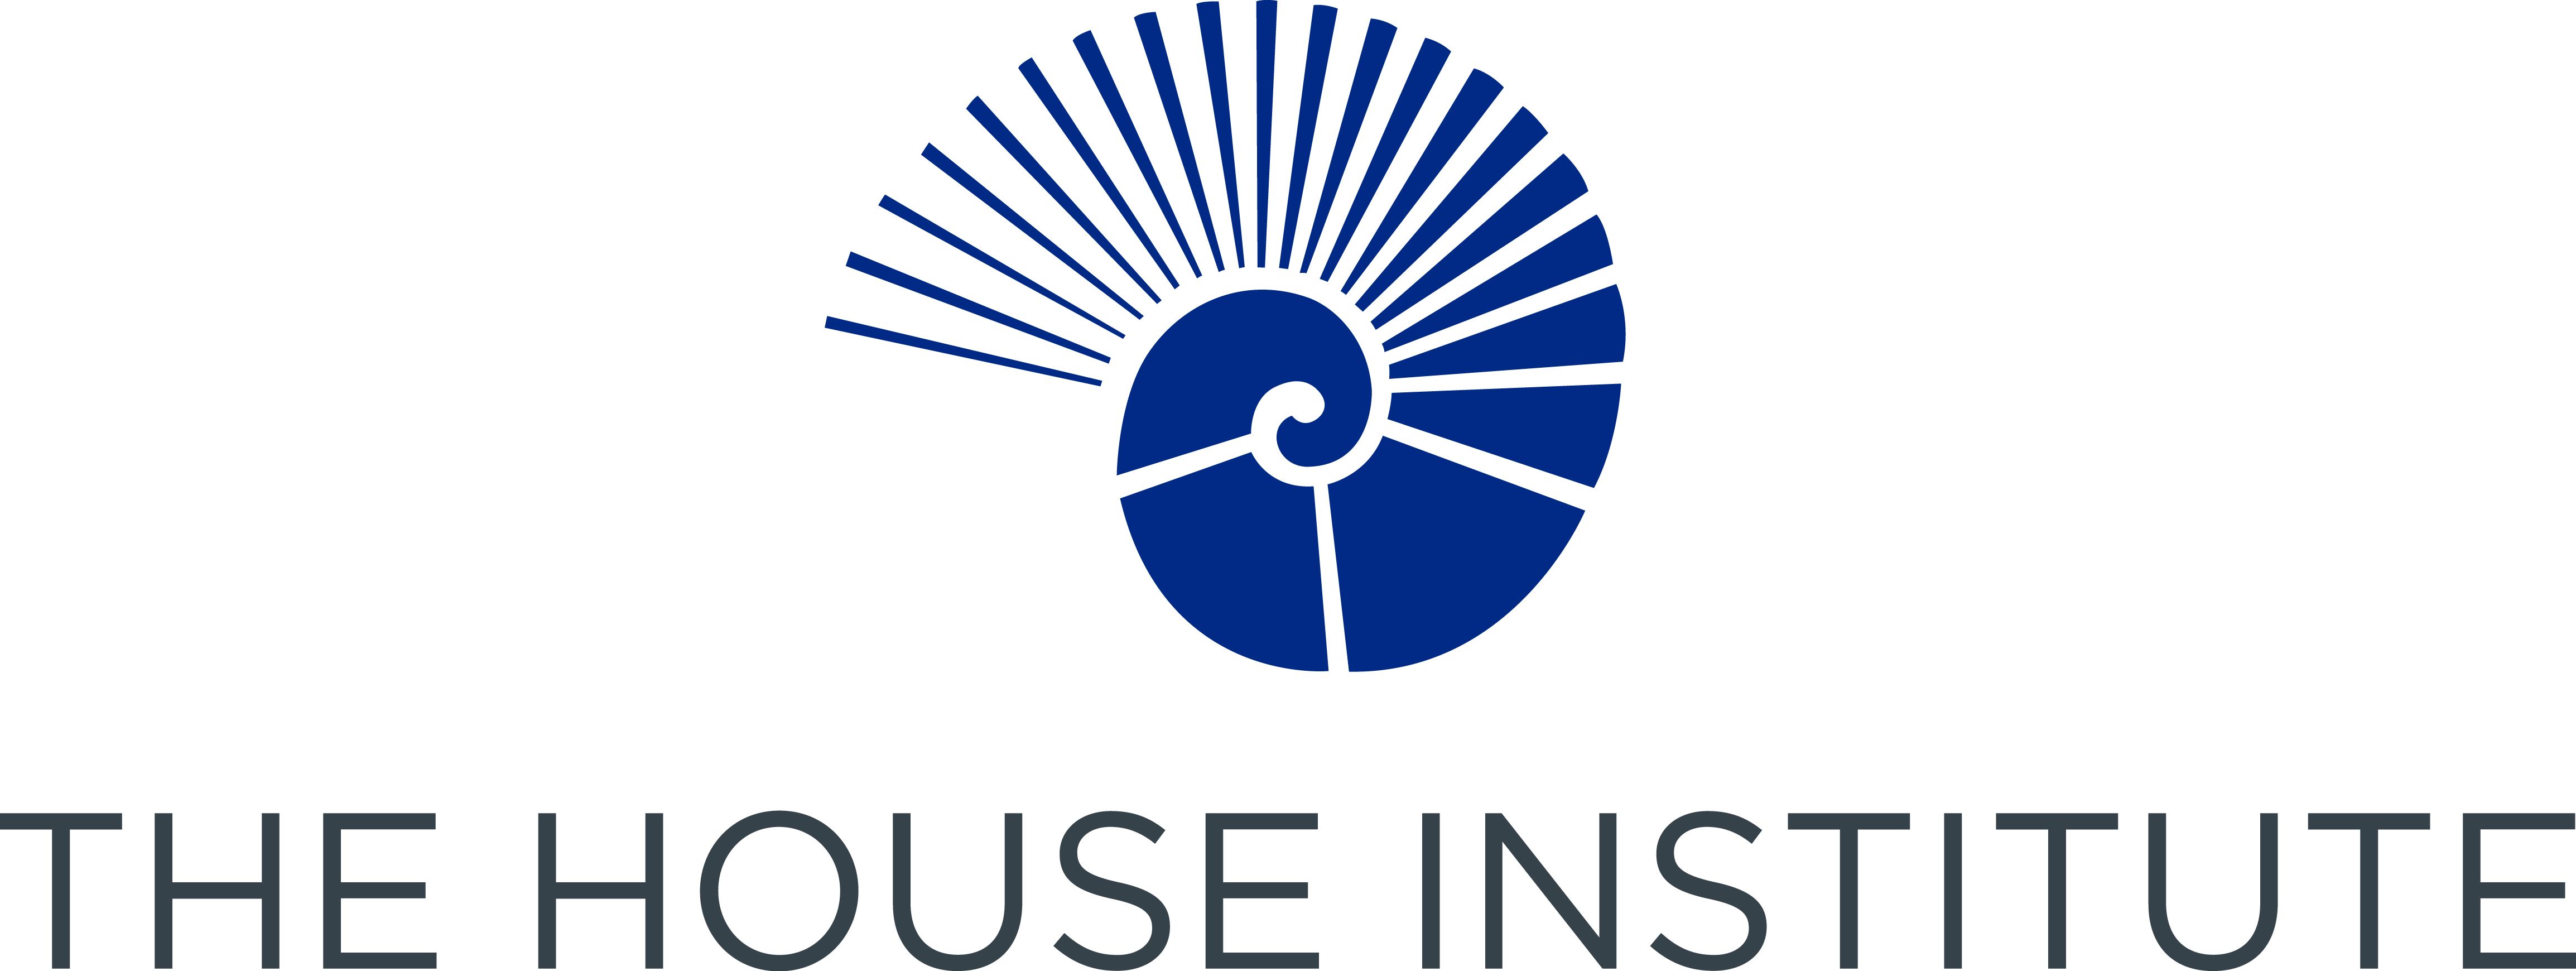 The House Institute